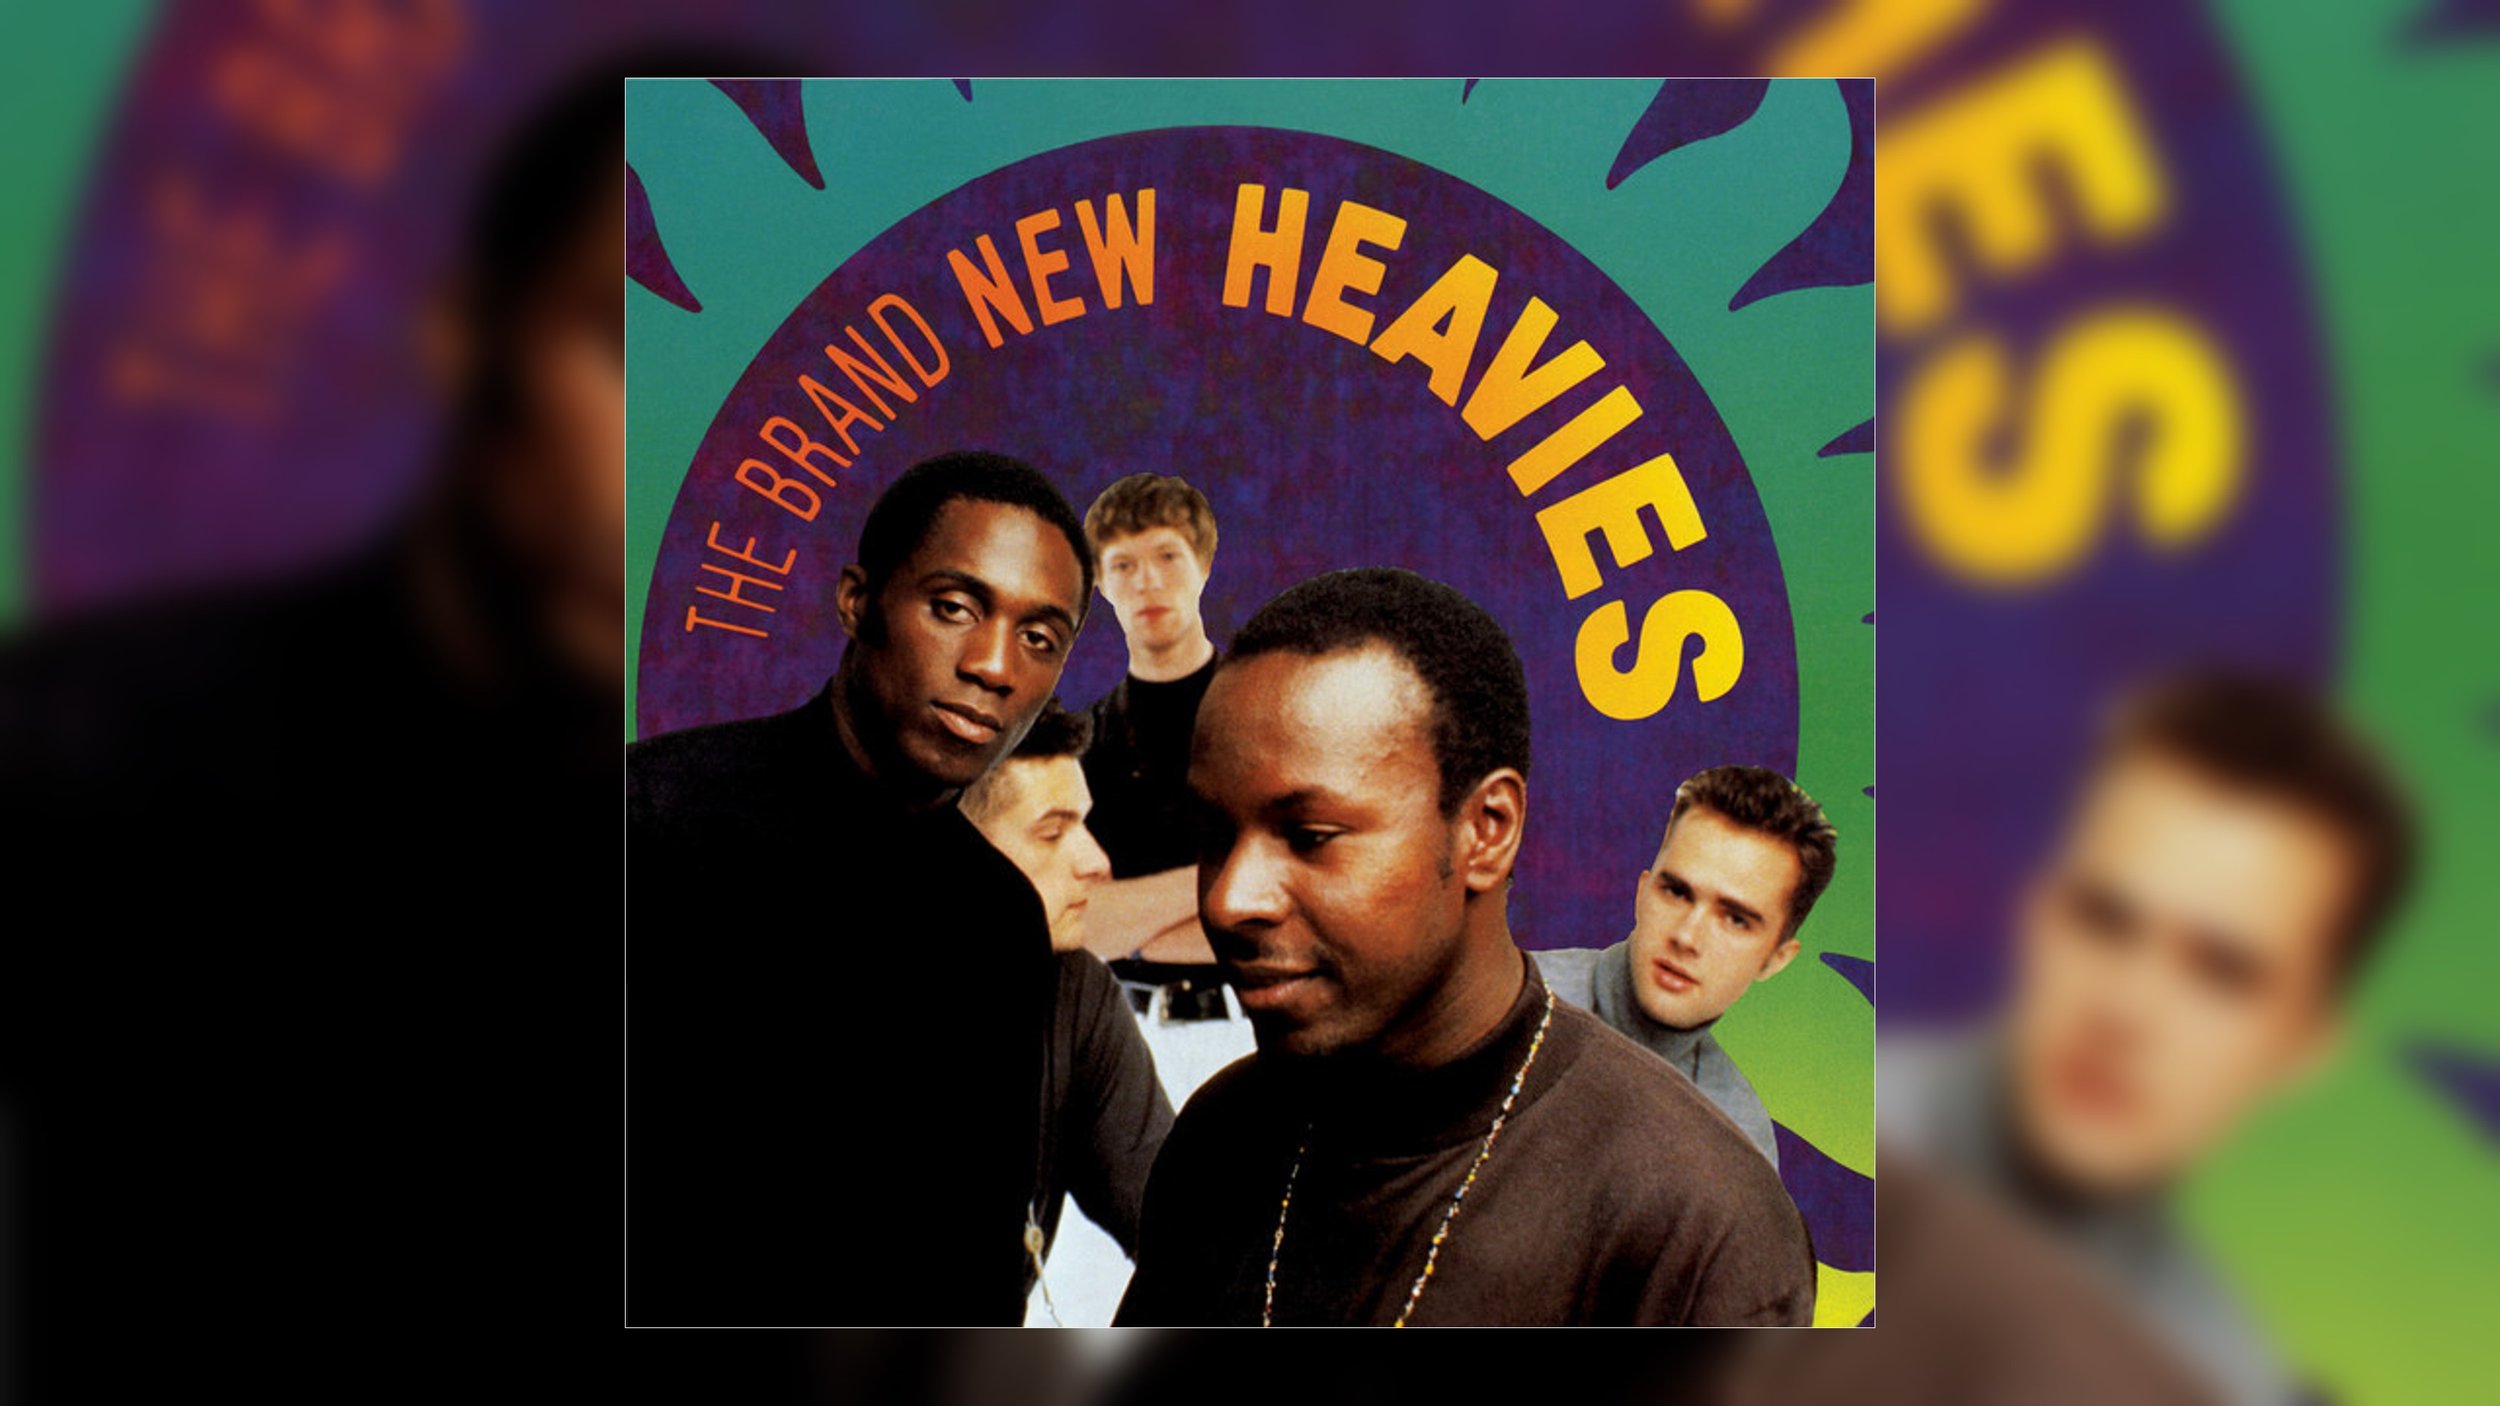 100 Most Dynamic Debut Albums The Brand New Heavies The Brand New Heavies 1991